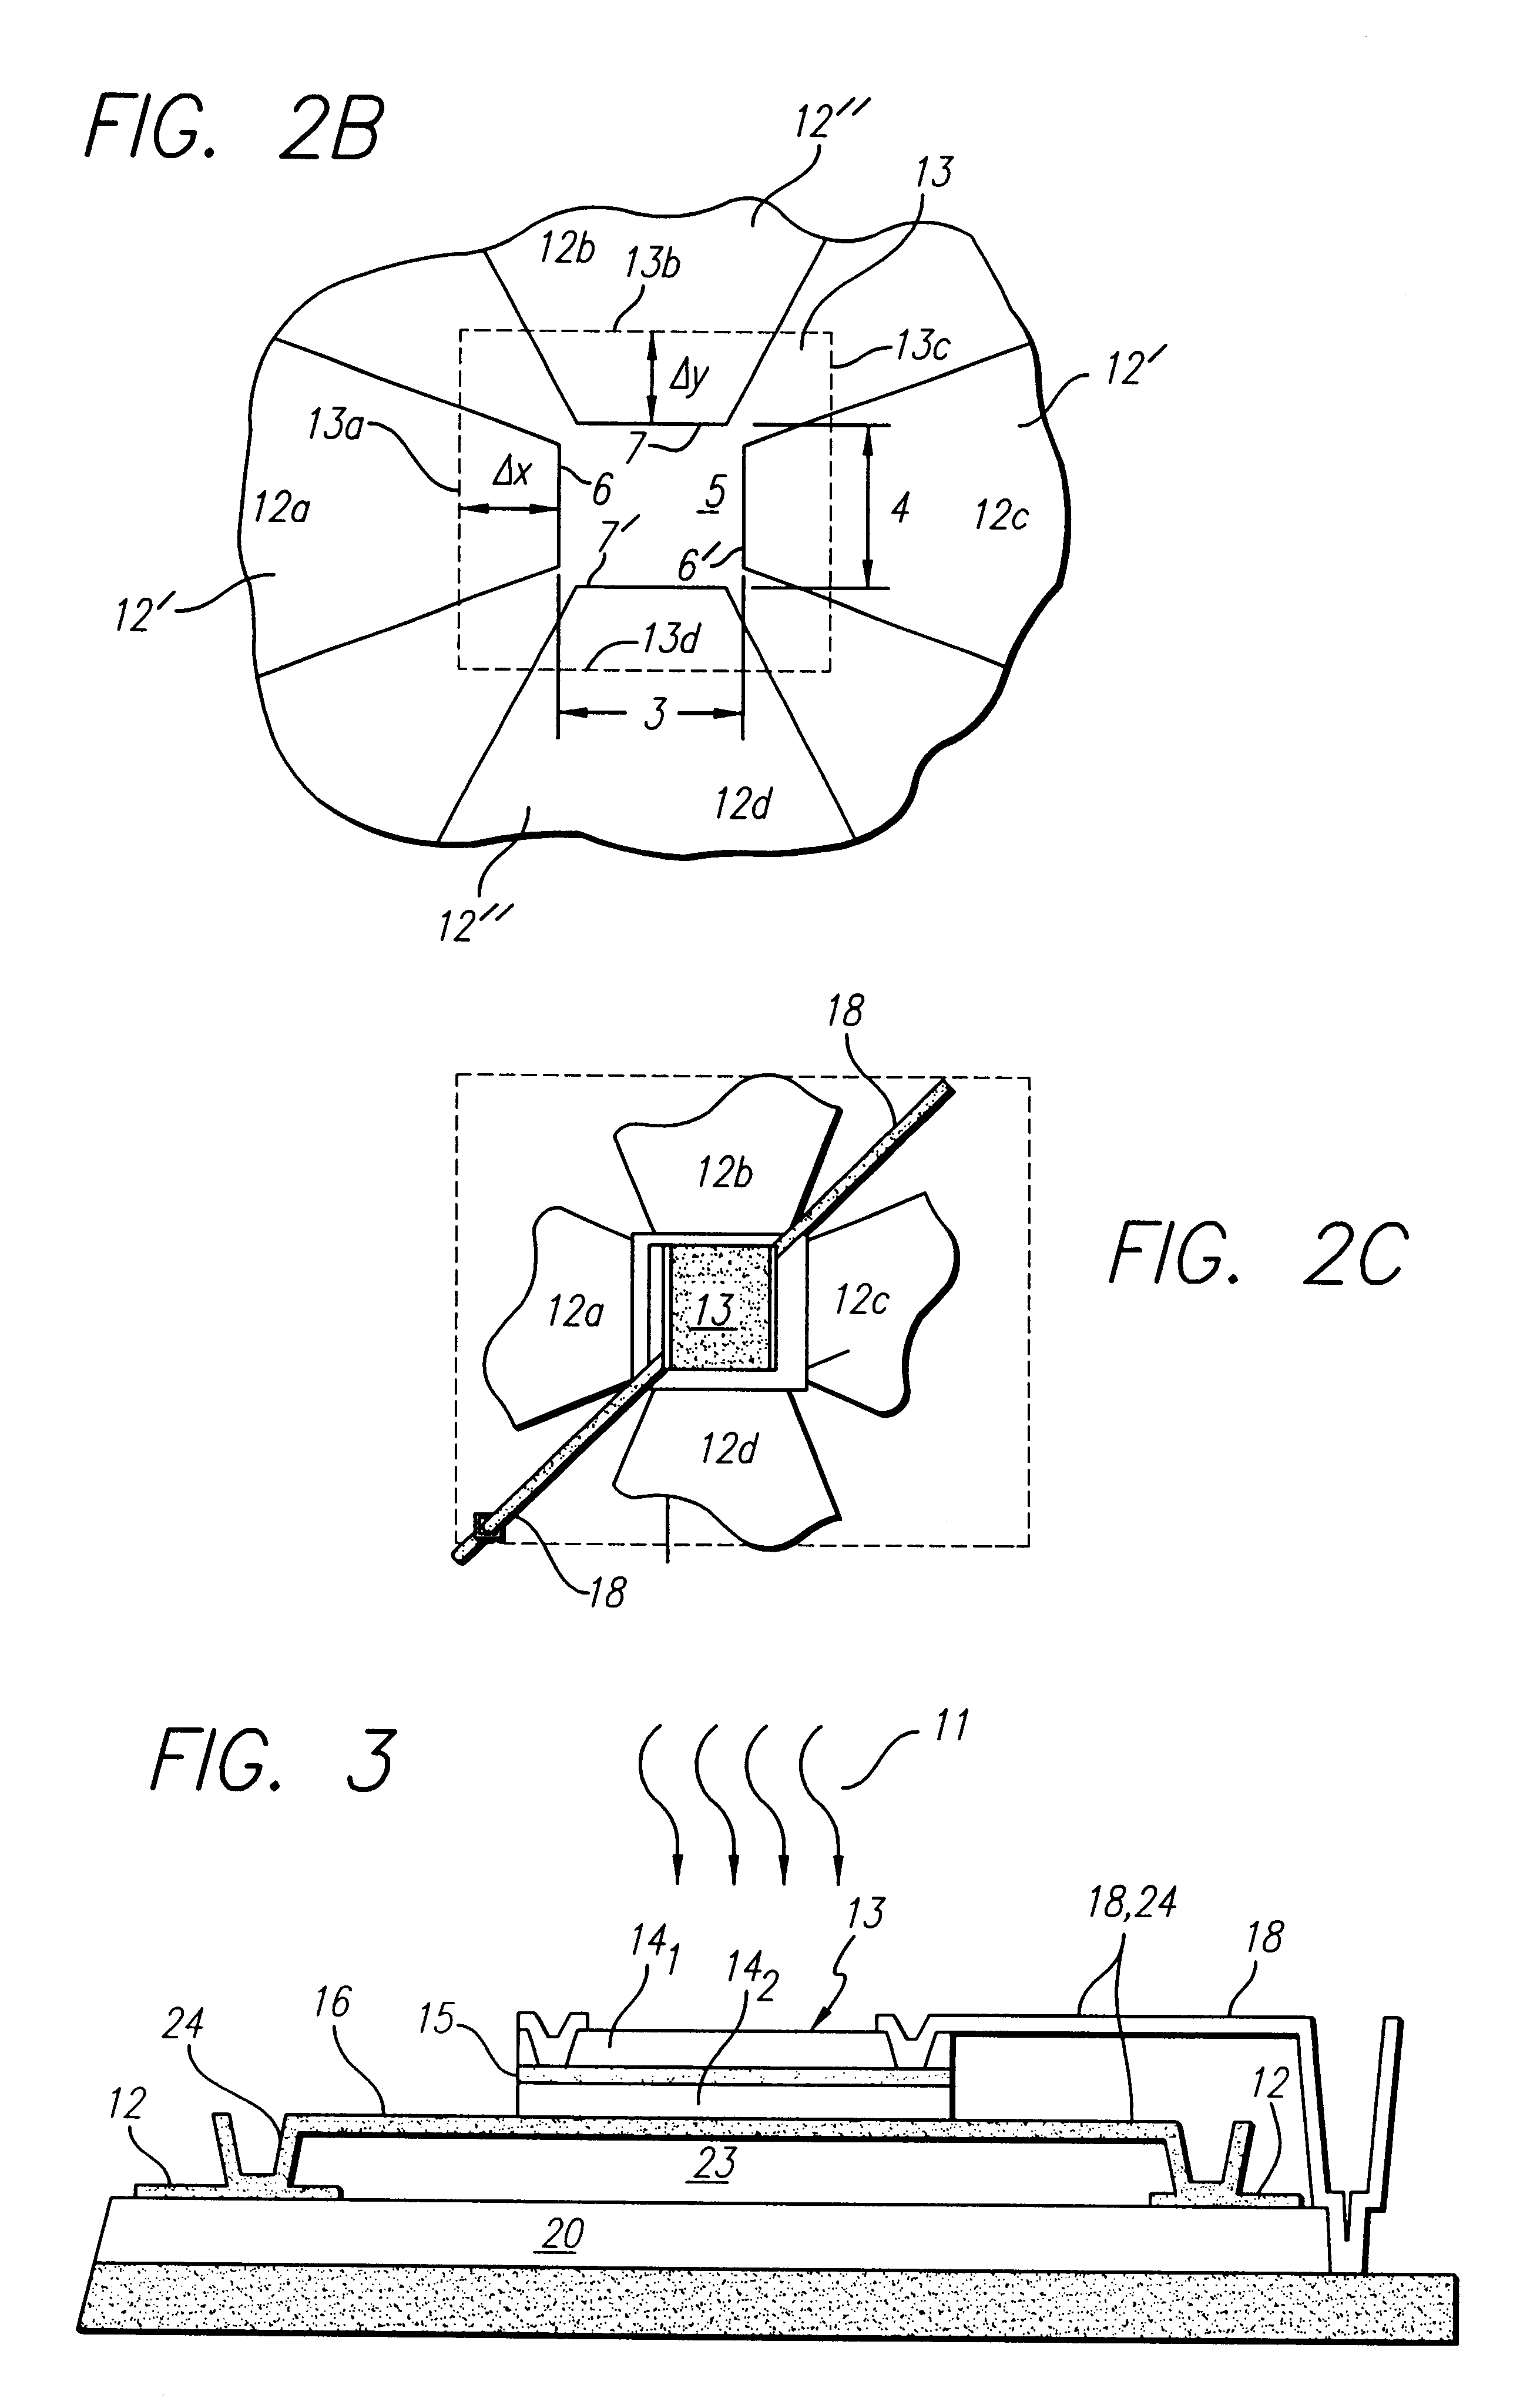 Architecture and method of coupling electromagnetic energy to thermal detectors